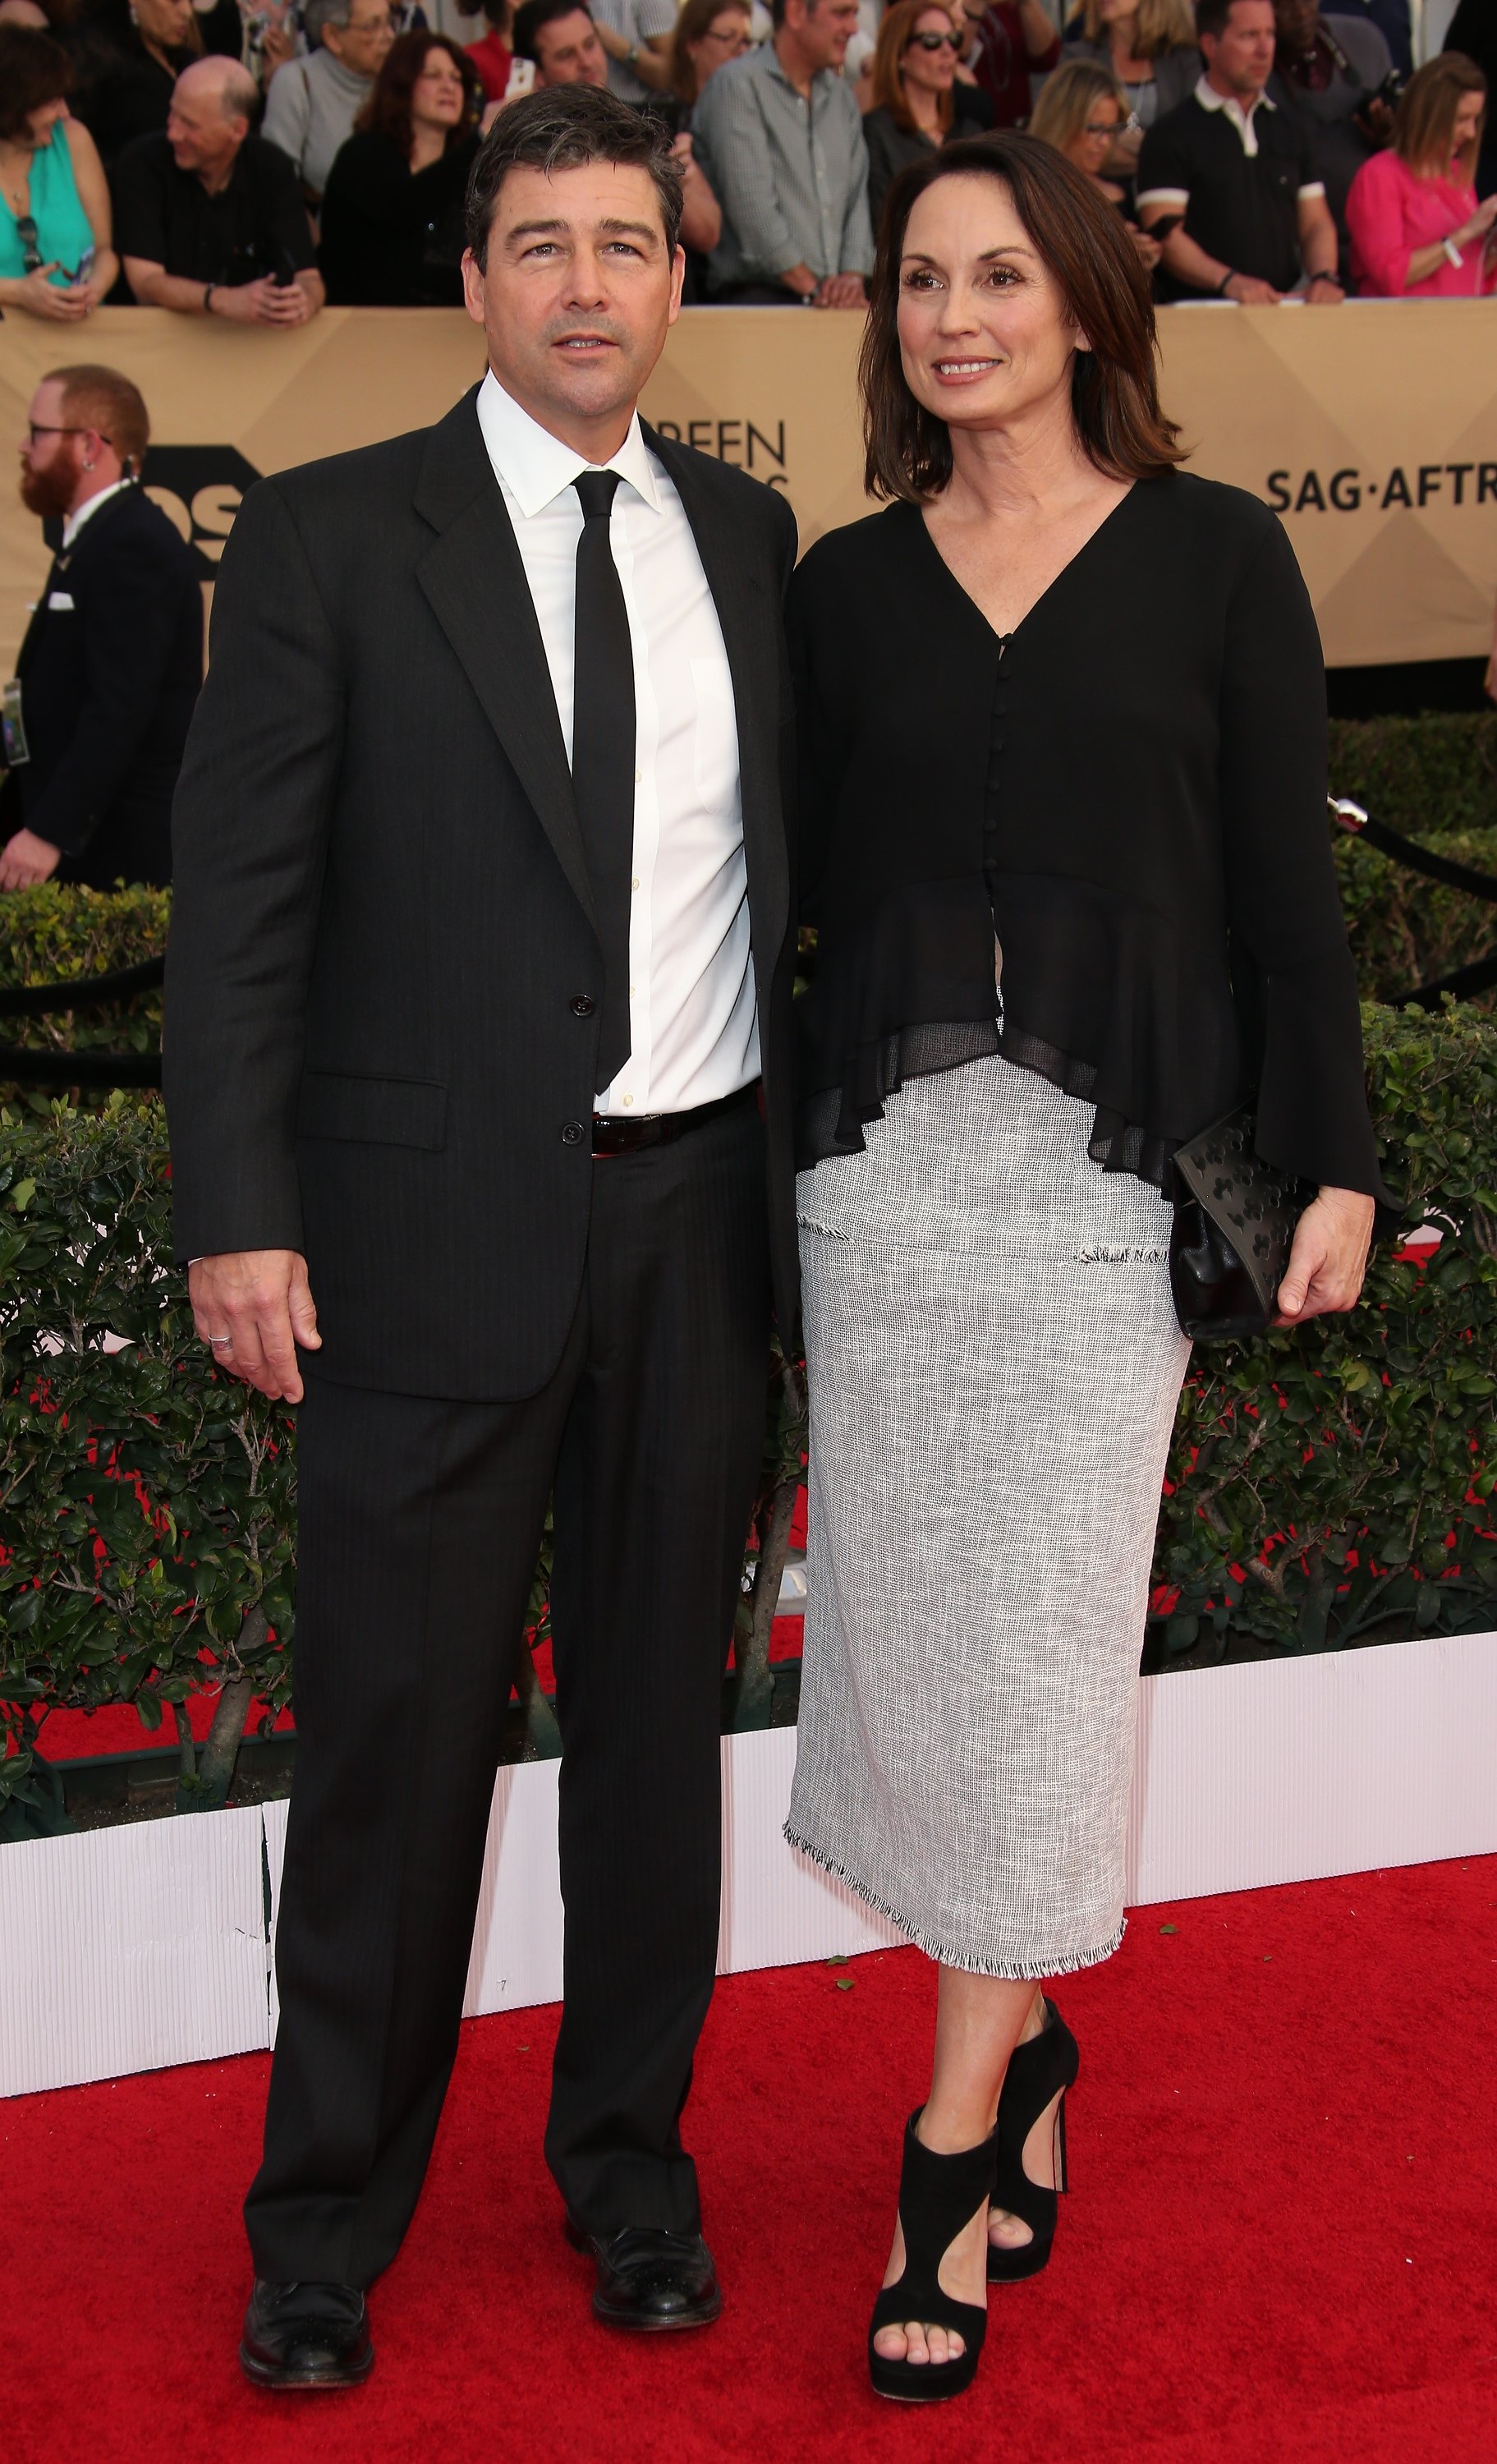 Kyle Chandler and Kathryn Chandler at the 23rd Annual Screen Actors Guild Awards on January 29, 2017, in California. | Source: Getty Images